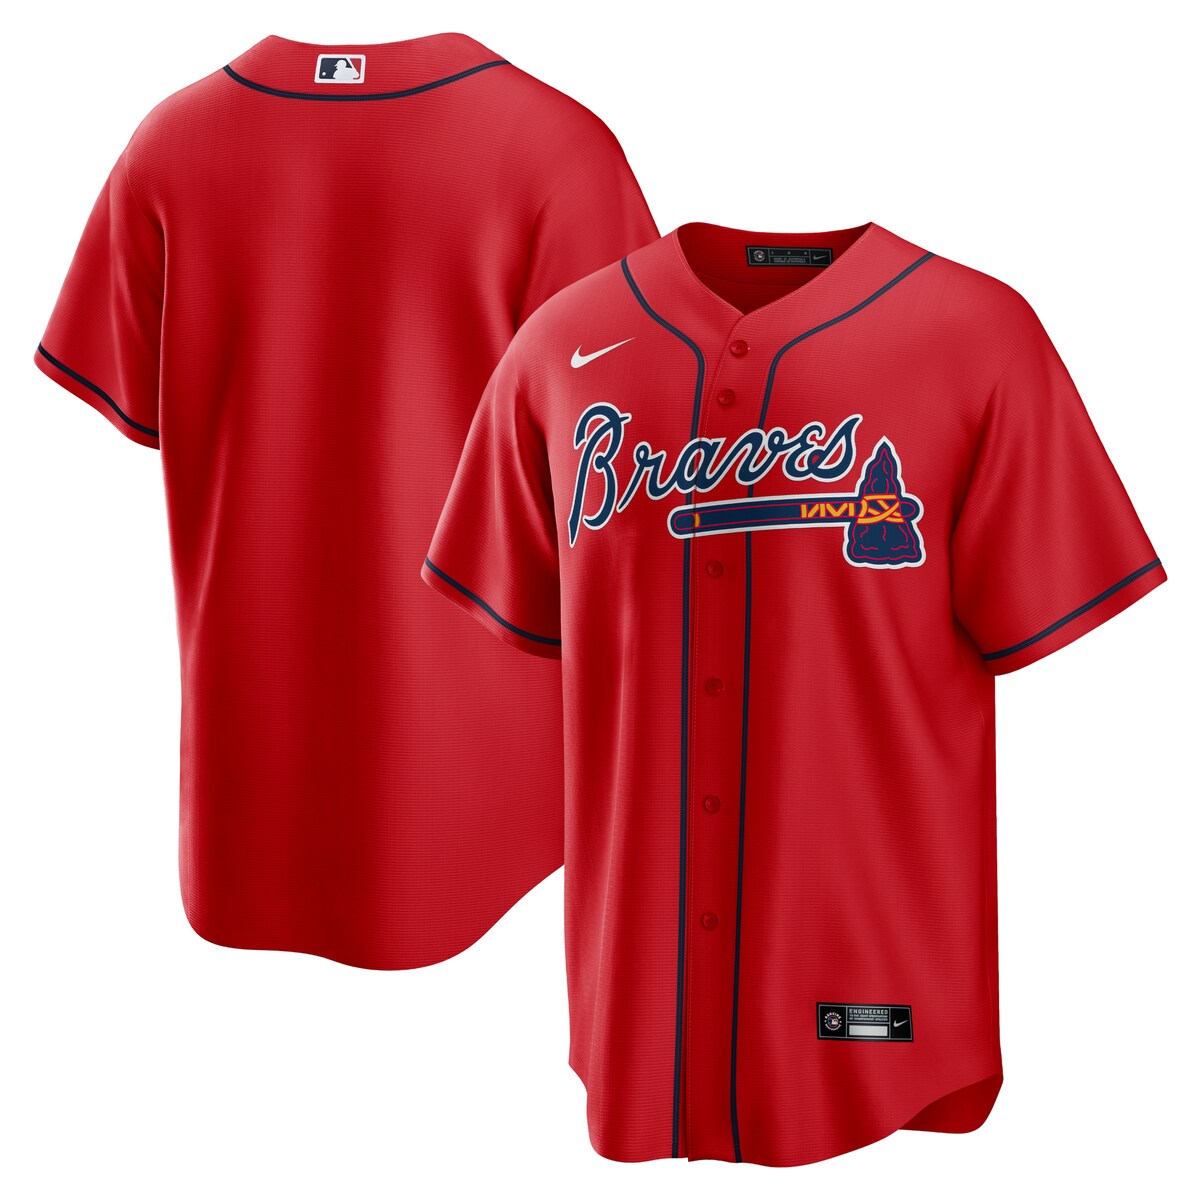 As the ultimate Atlanta Braves fan, you deserve the same look that your favorite players sport out on the field. This Alternate Replica Team jersey from Nike brings the team's official design to your wardrobe for a consistently spirited look on game day. The polyester material and slick Atlanta Braves graphics are just what any fan needs to look and feel their best.Brand: NikeJersey Color Style: AlternateHeat-sealed jock tagHeat-sealed transfer appliqueMachine wash gentle or dry clean. Tumble dry low, hang dry preferred.ImportedMLB Batterman applique on center back neckRounded hemShort sleeveMaterial: 100% PolyesterFull-button frontReplica JerseyOfficially licensed